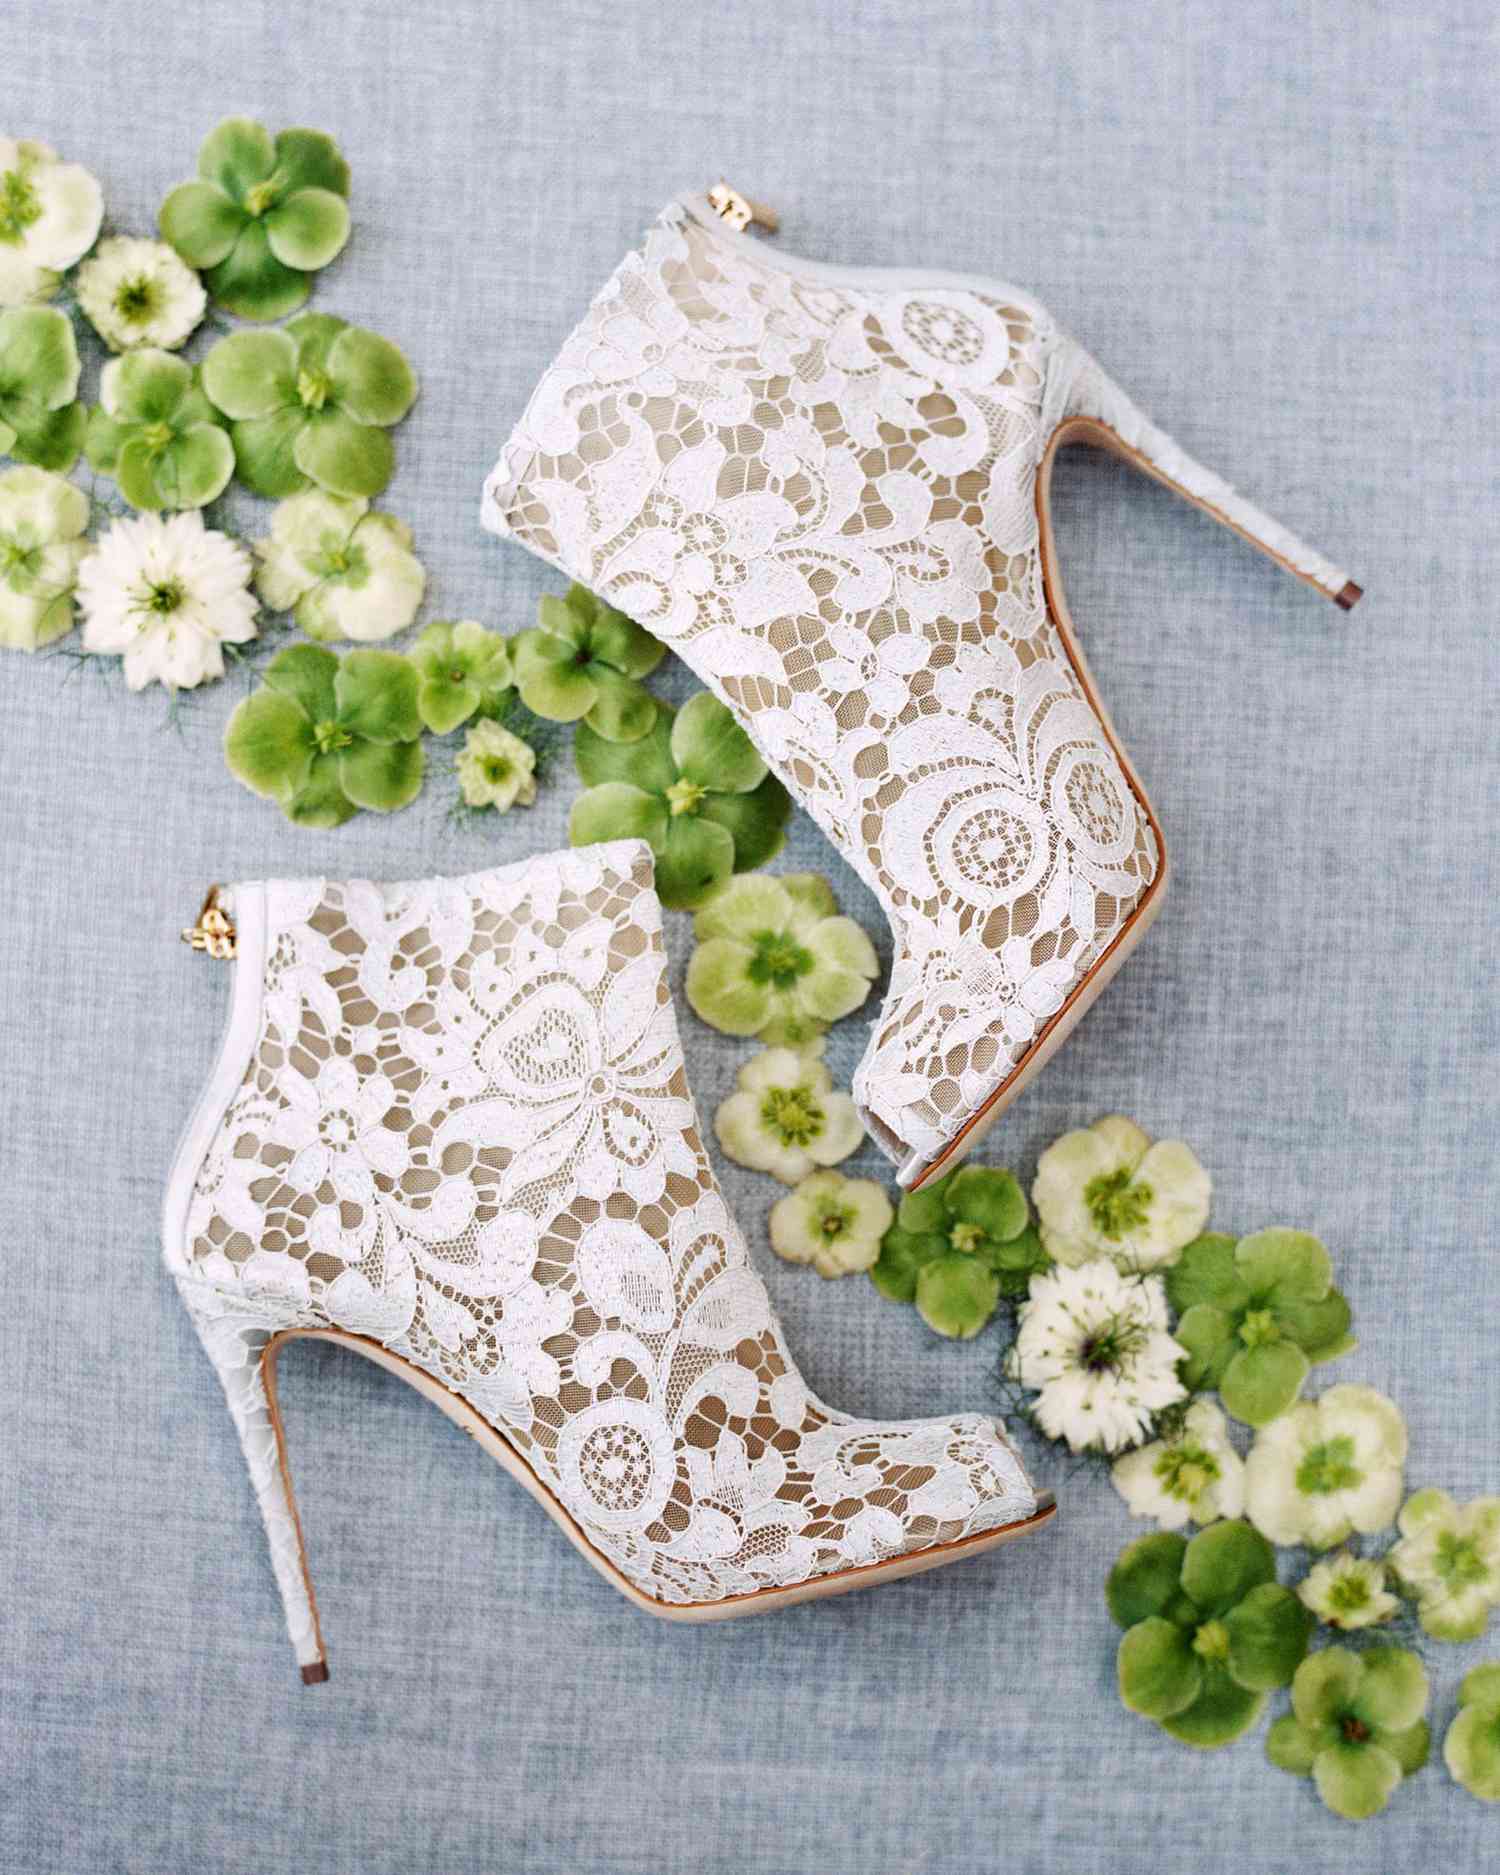 Dismantle Dictation writing 25 Nontraditional Wedding Shoe Ideas from Stylish Brides | Martha Stewart